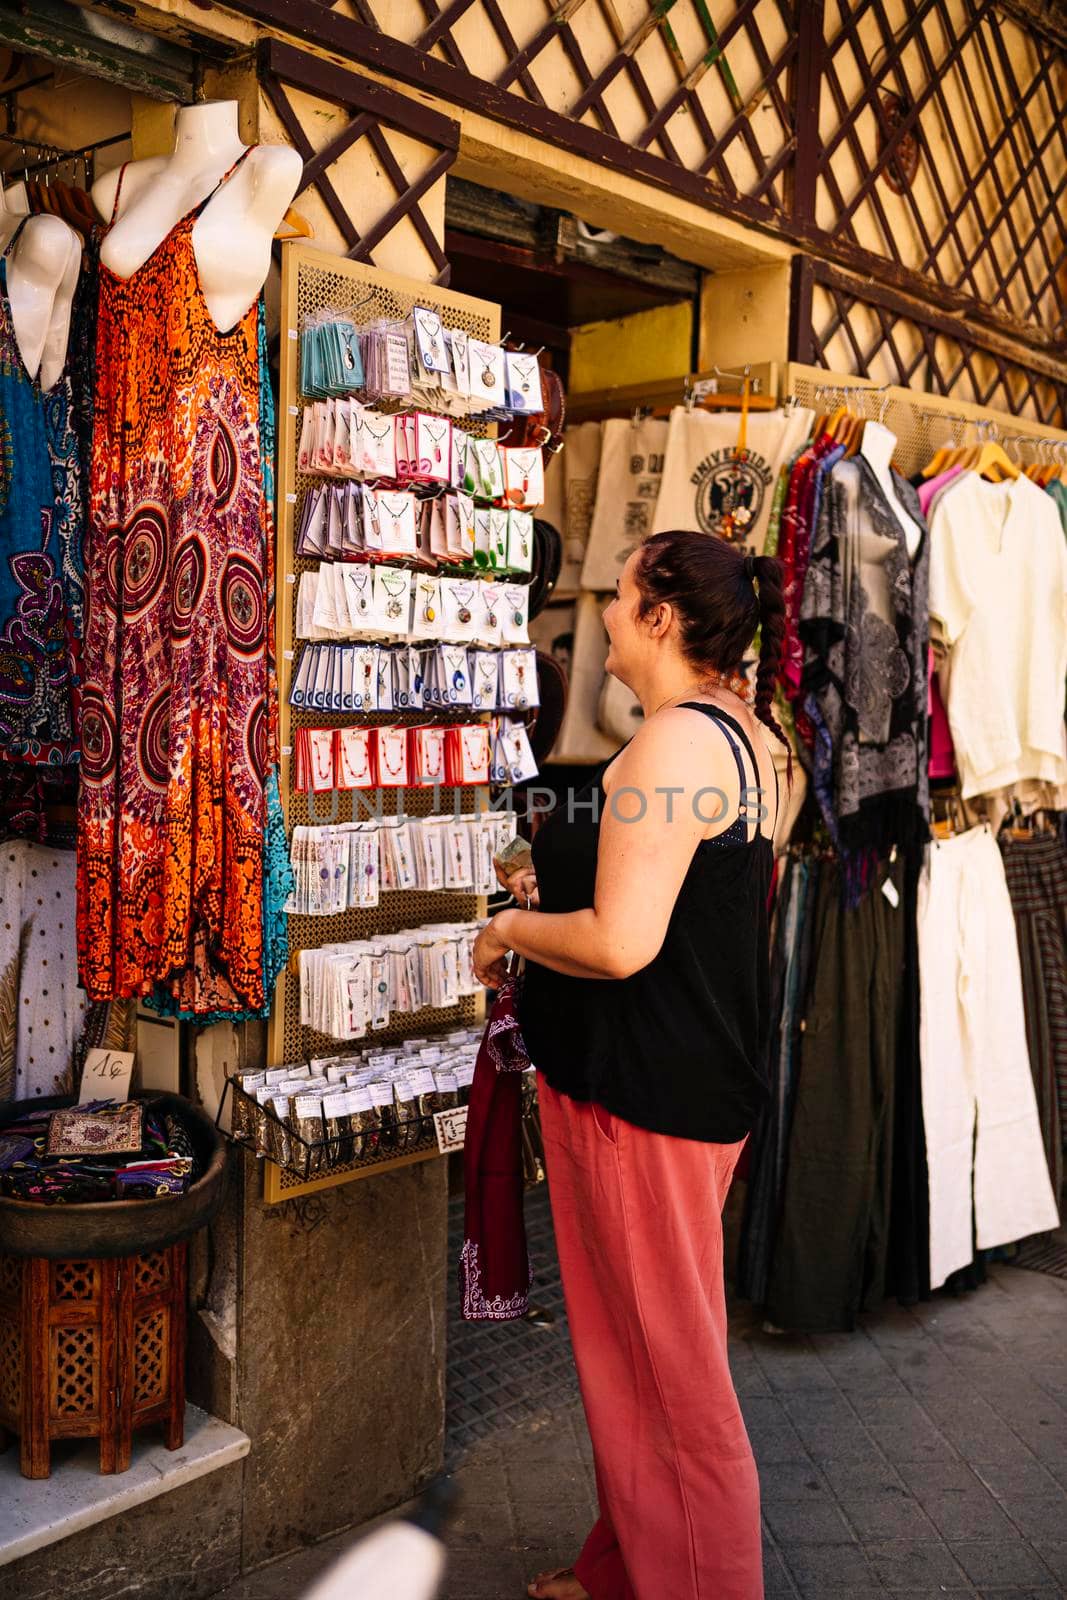 Woman buying souvenirs at the street market by barcielaphoto